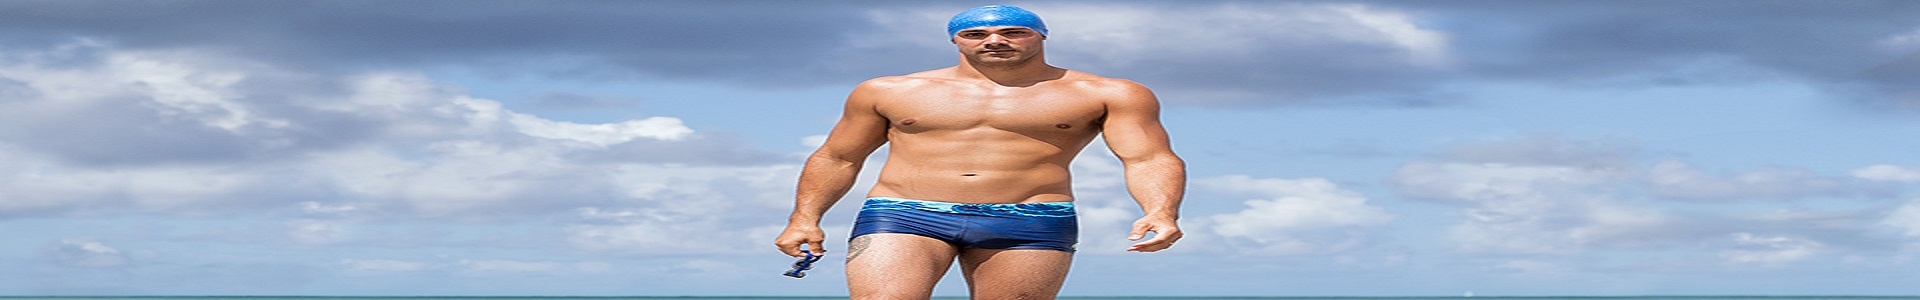 ExtraOffre Sport Banner Mens Clothing Swimwear Category